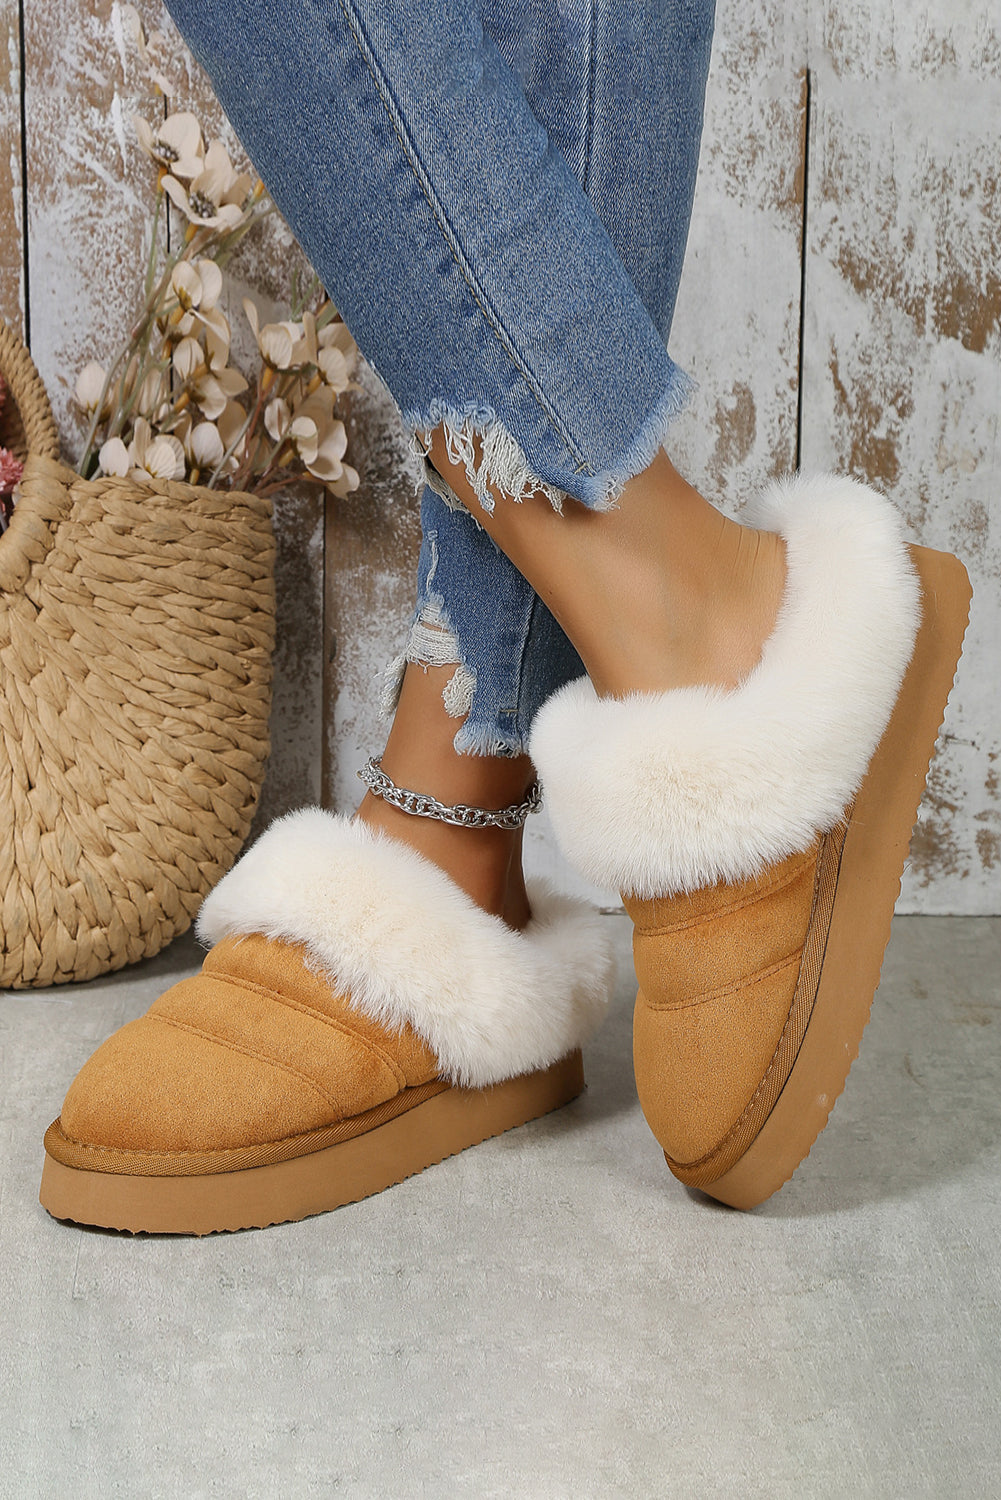 - Plush Suede Patchwork Thick Sole Slippers - 2 colors - womens slippers at TFC&H Co.